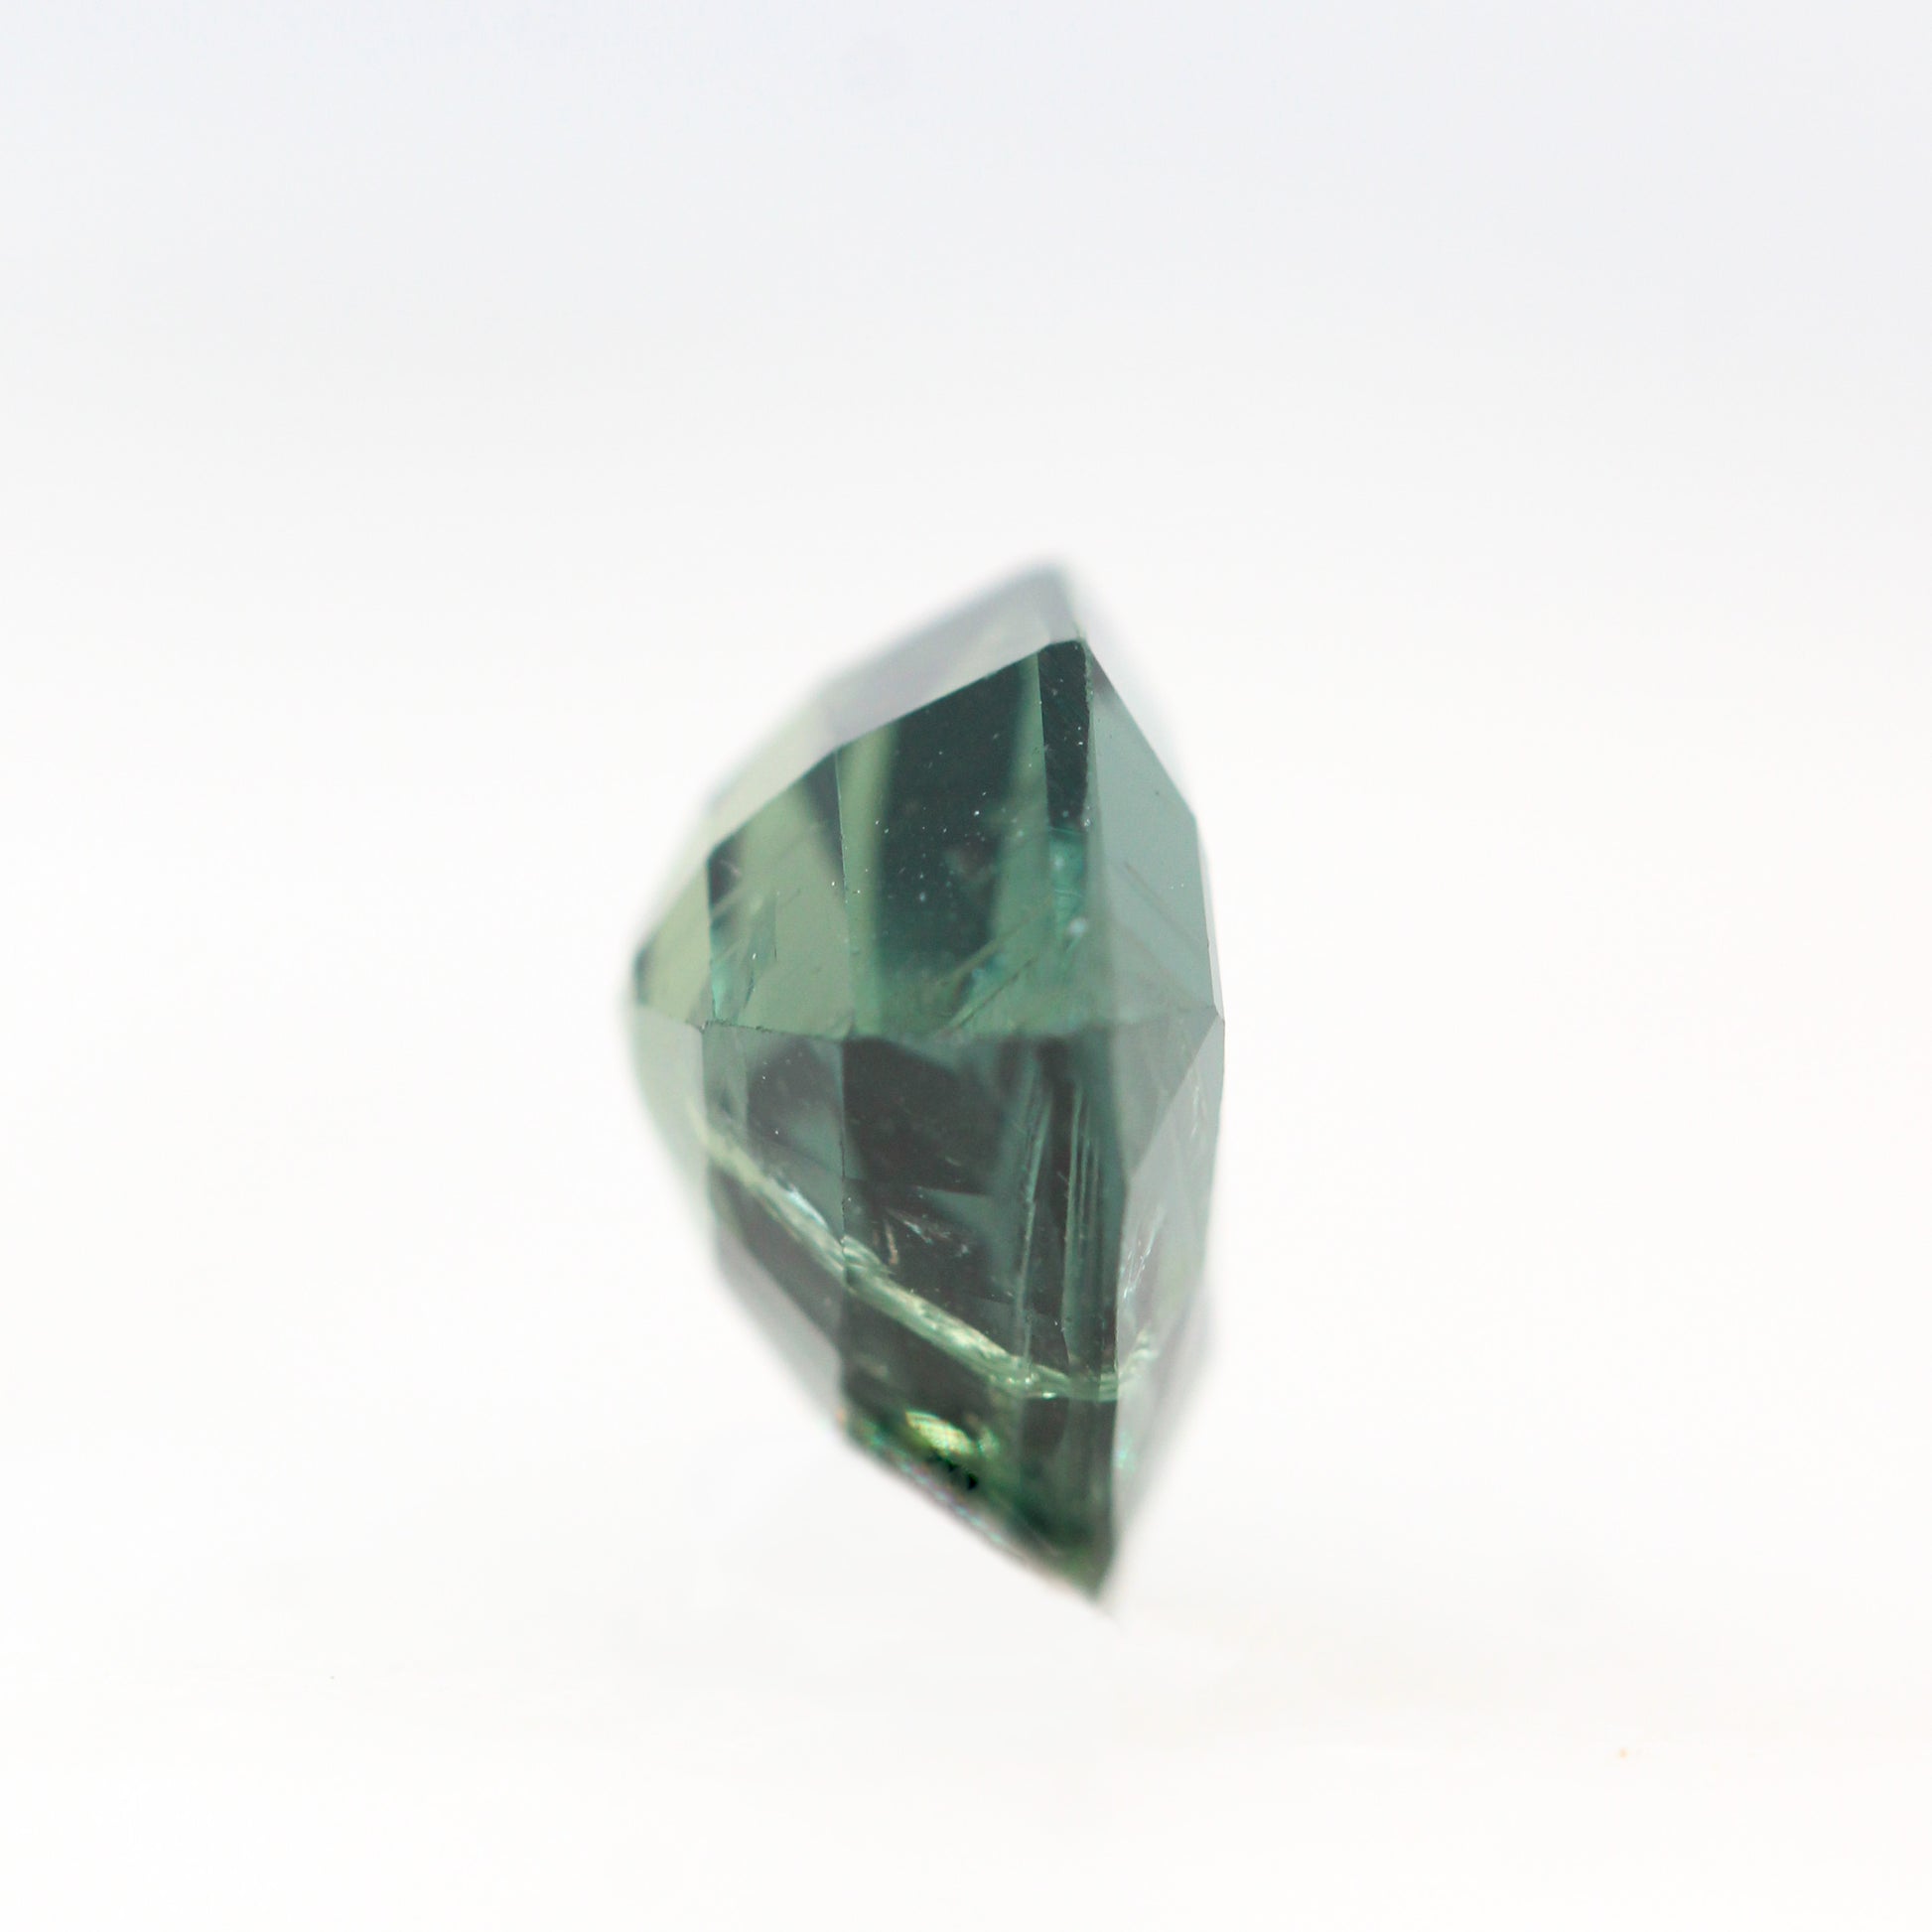 4.02 Carat Green Shield Cut Sapphire for Custom Work - Inventory Code GSS402 - Midwinter Co. Alternative Bridal Rings and Modern Fine Jewelry